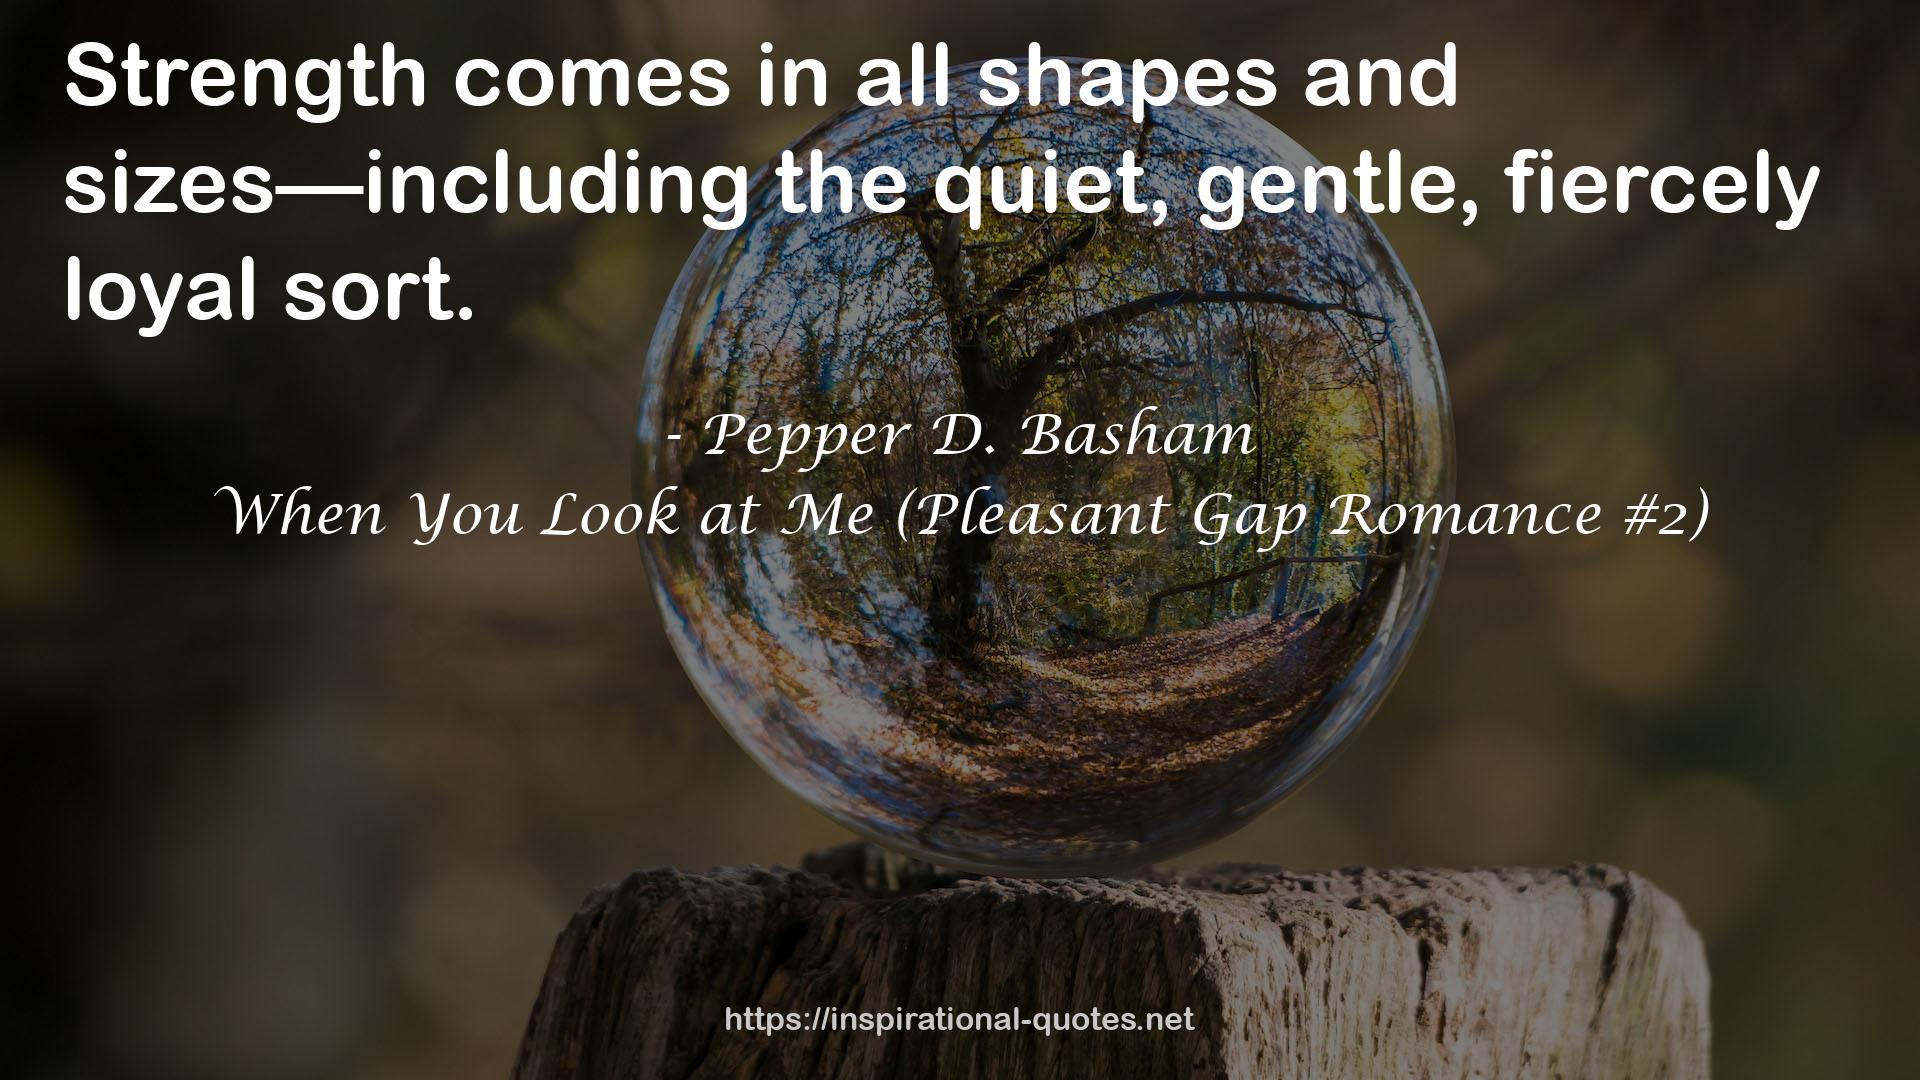 When You Look at Me (Pleasant Gap Romance #2) QUOTES